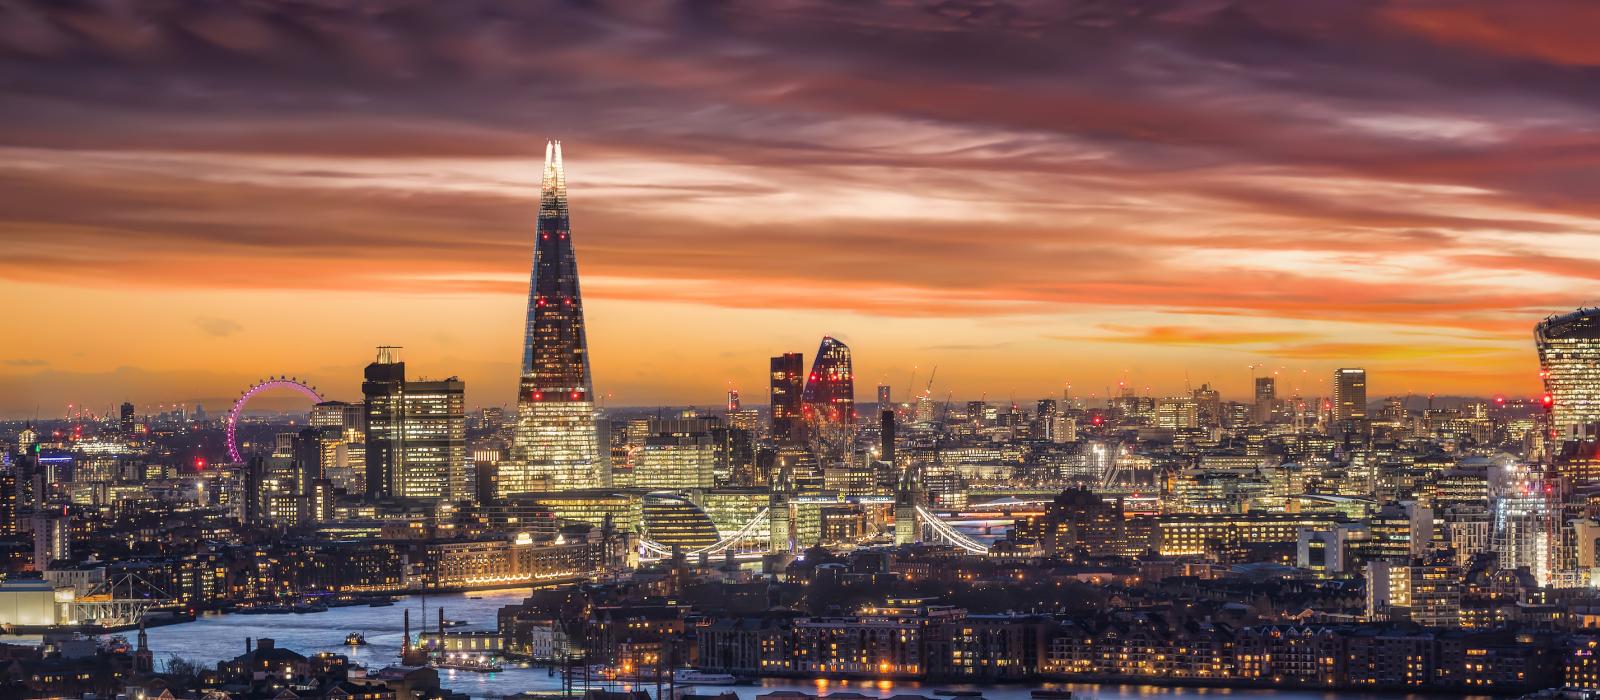 The skyline of London, during an intense sunset